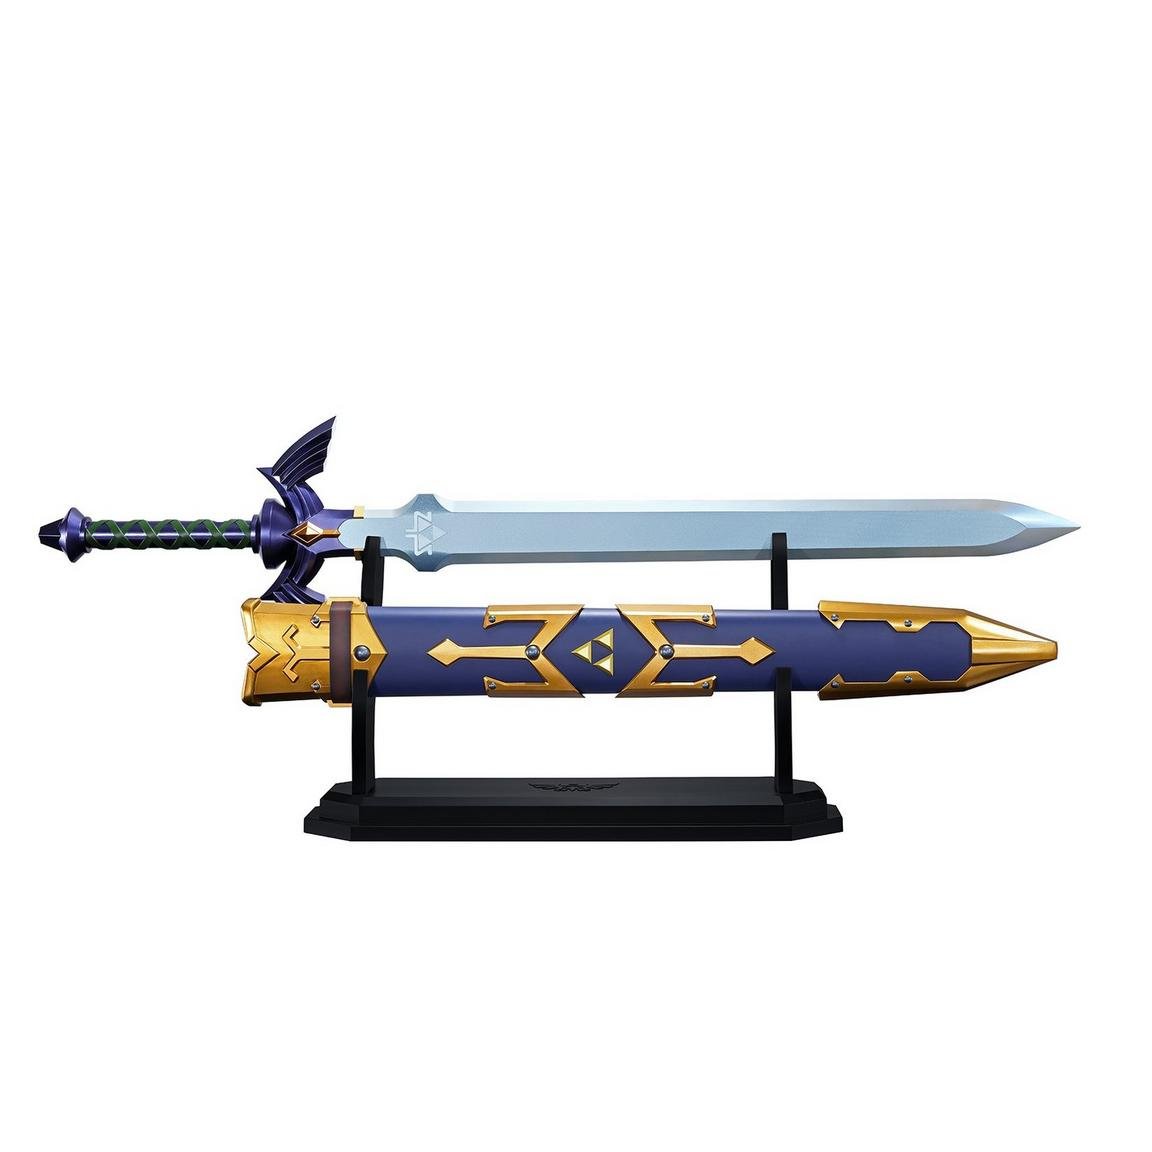 Bandai Spirits Nintendo The Legend of Zelda Proplica Master Sword is up for preorder at GameStop ($199.99 + free shipping) - bit.ly/3QKokWP #ad